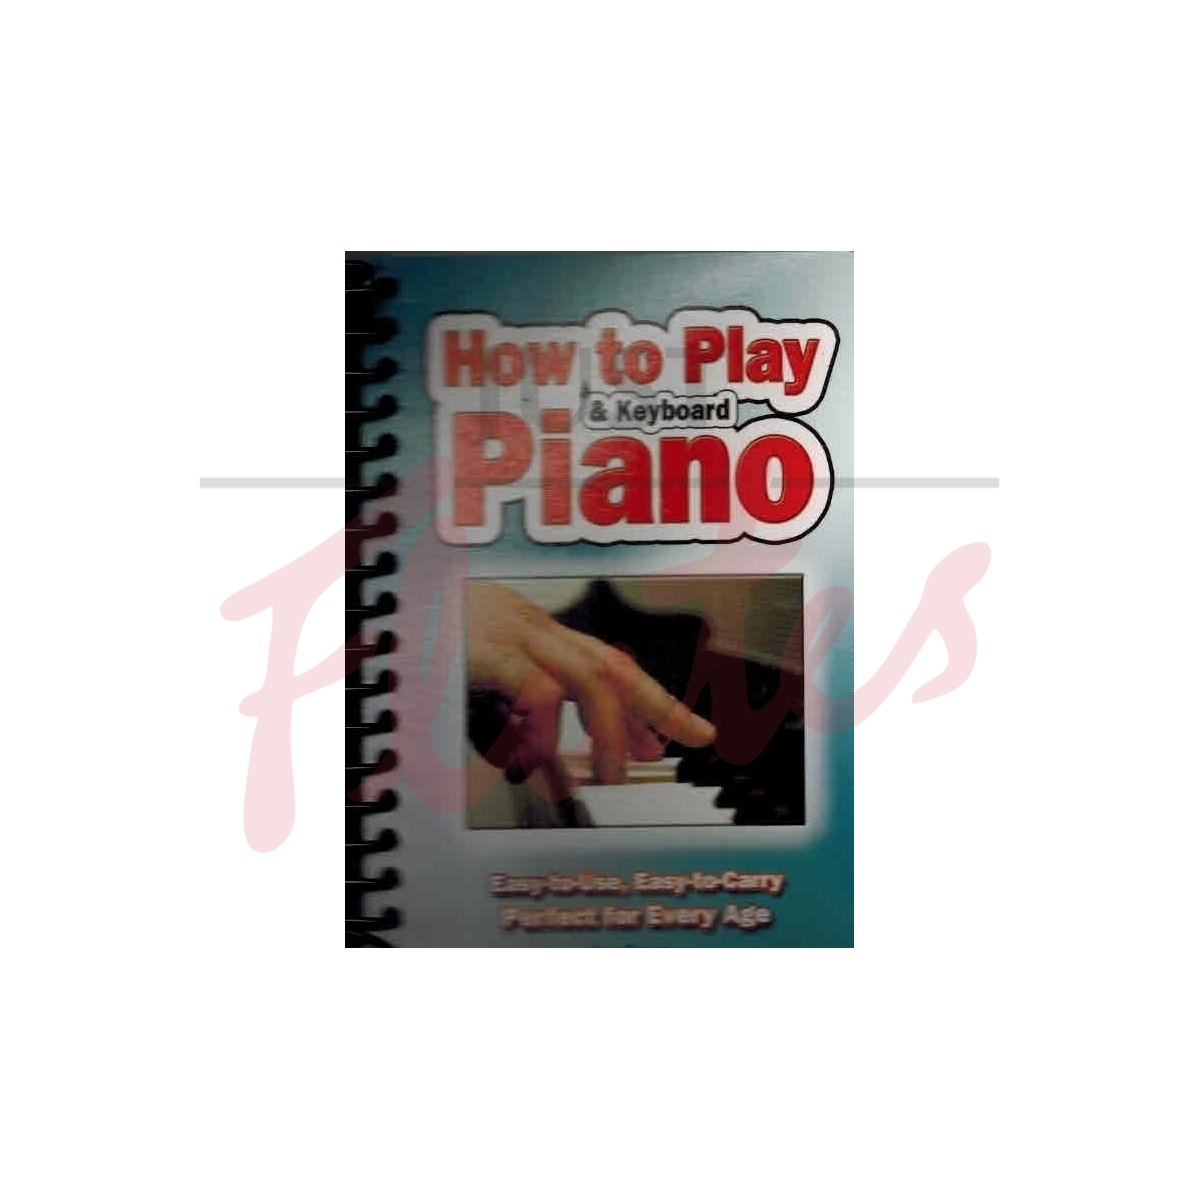 How to Play the Piano &amp; Keyboard